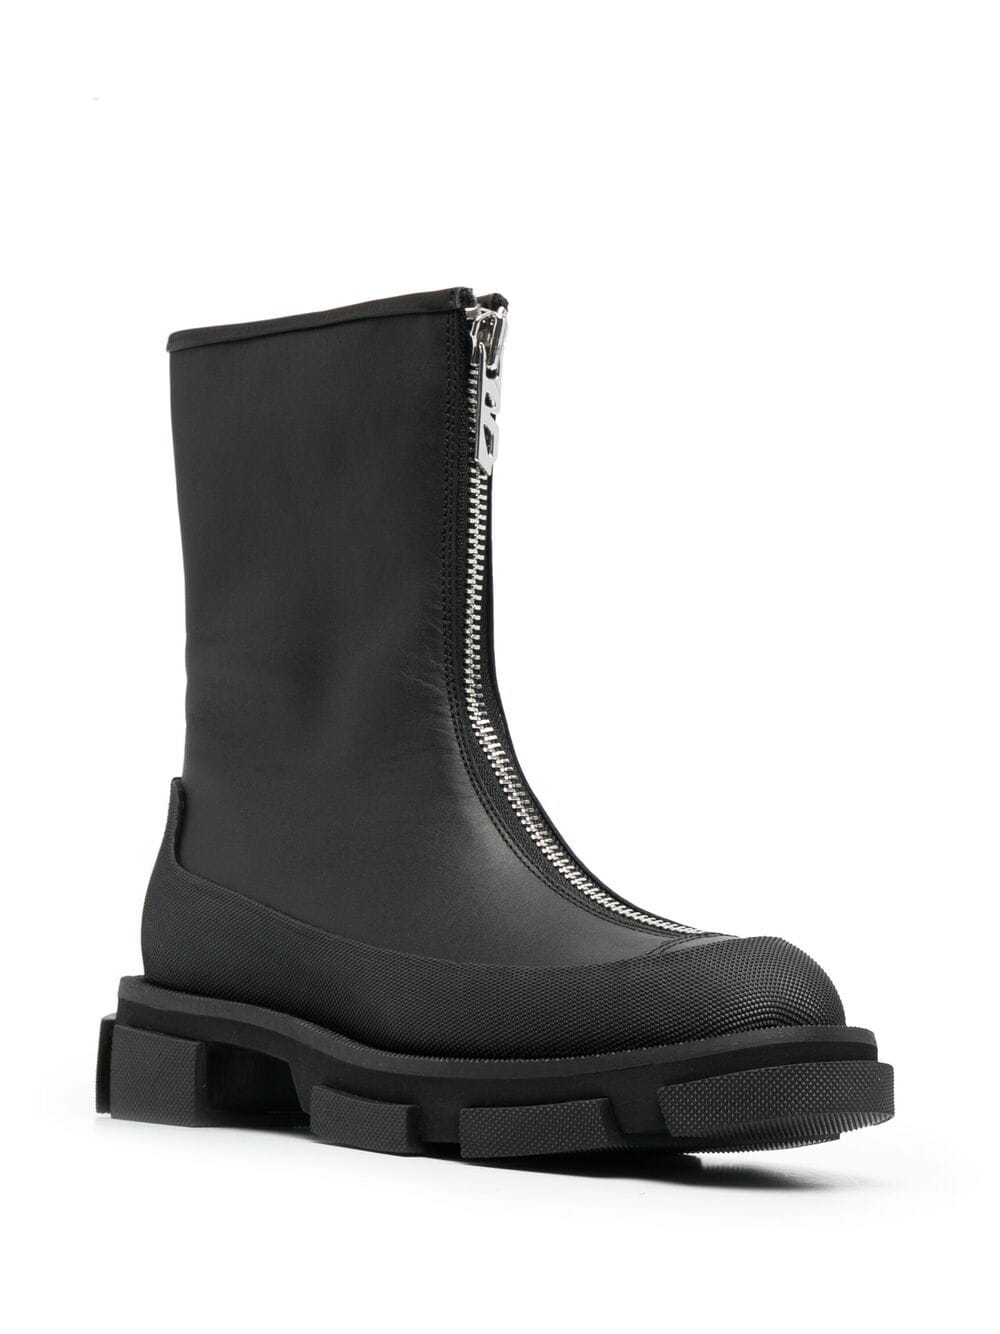 Image 2 of Both zip-up ankle boots